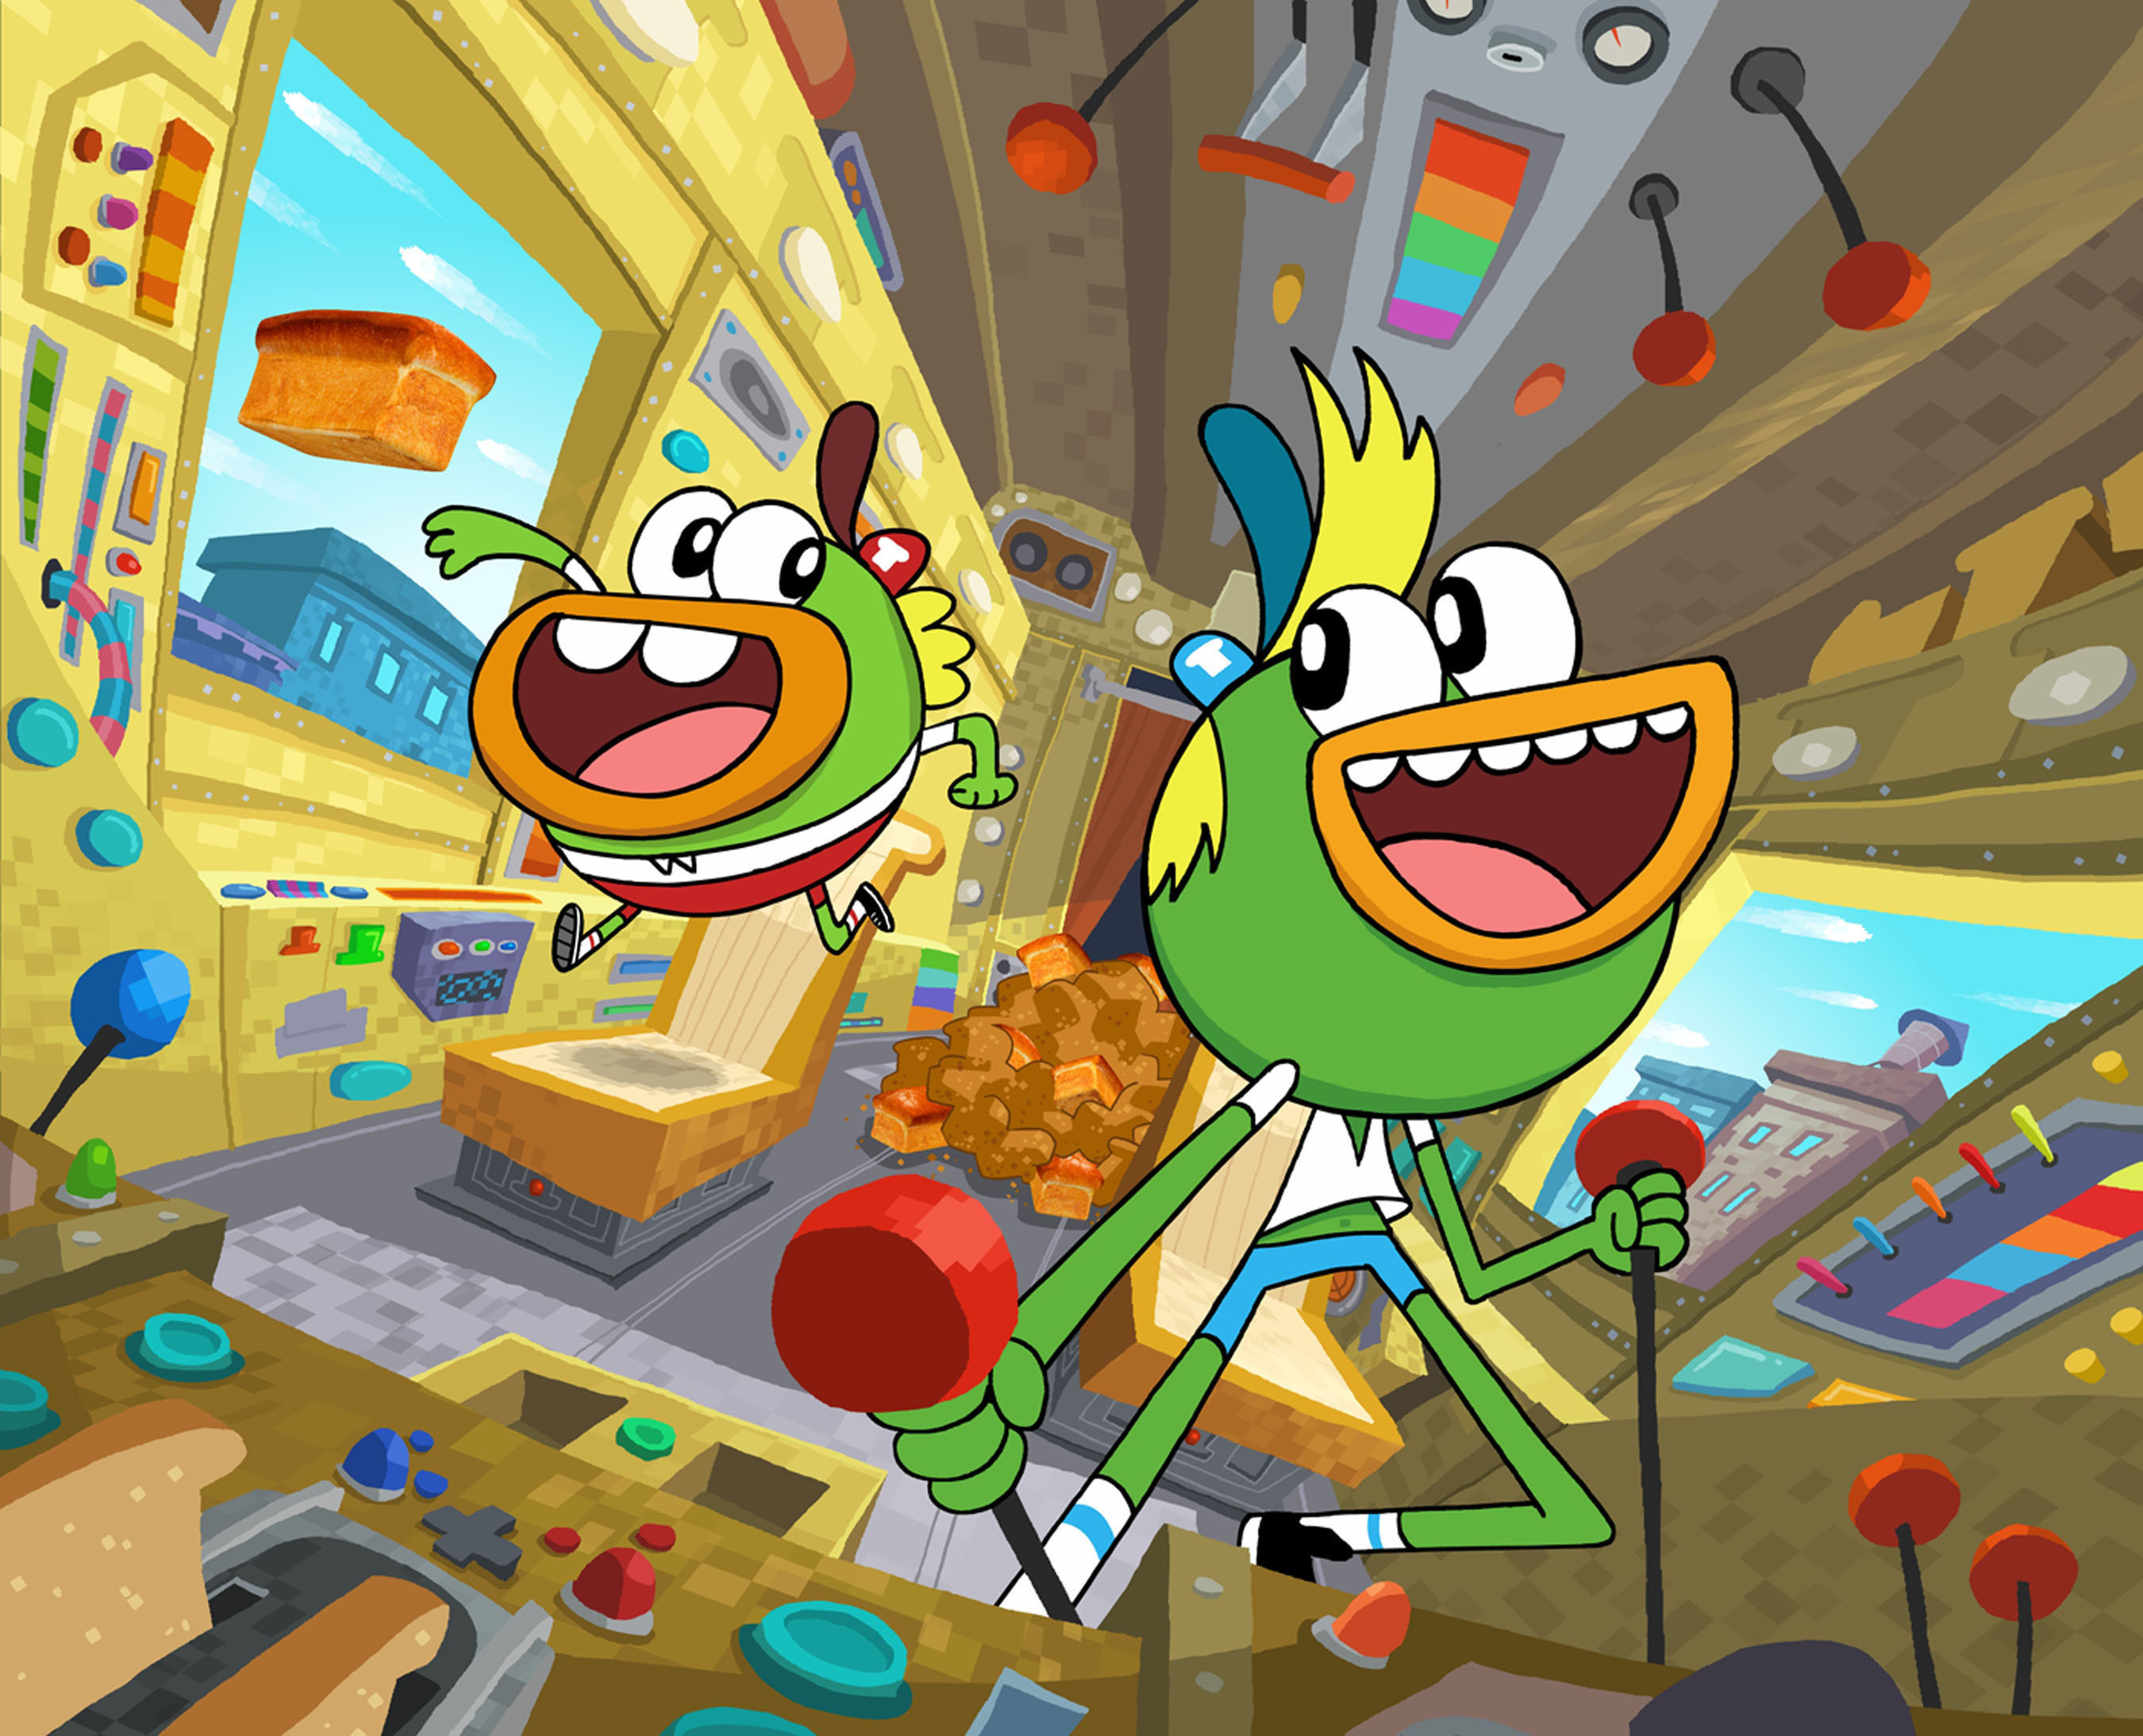 Nickelodeon Breaks Bread with Brand-New Animated Series Breadwinners, Delivering Monday, Feb. 17, at 7:30 P.M. (ET/PT). (PRNewsFoto/Nickelodeon) (PRNewsFoto/NICKELODEON)